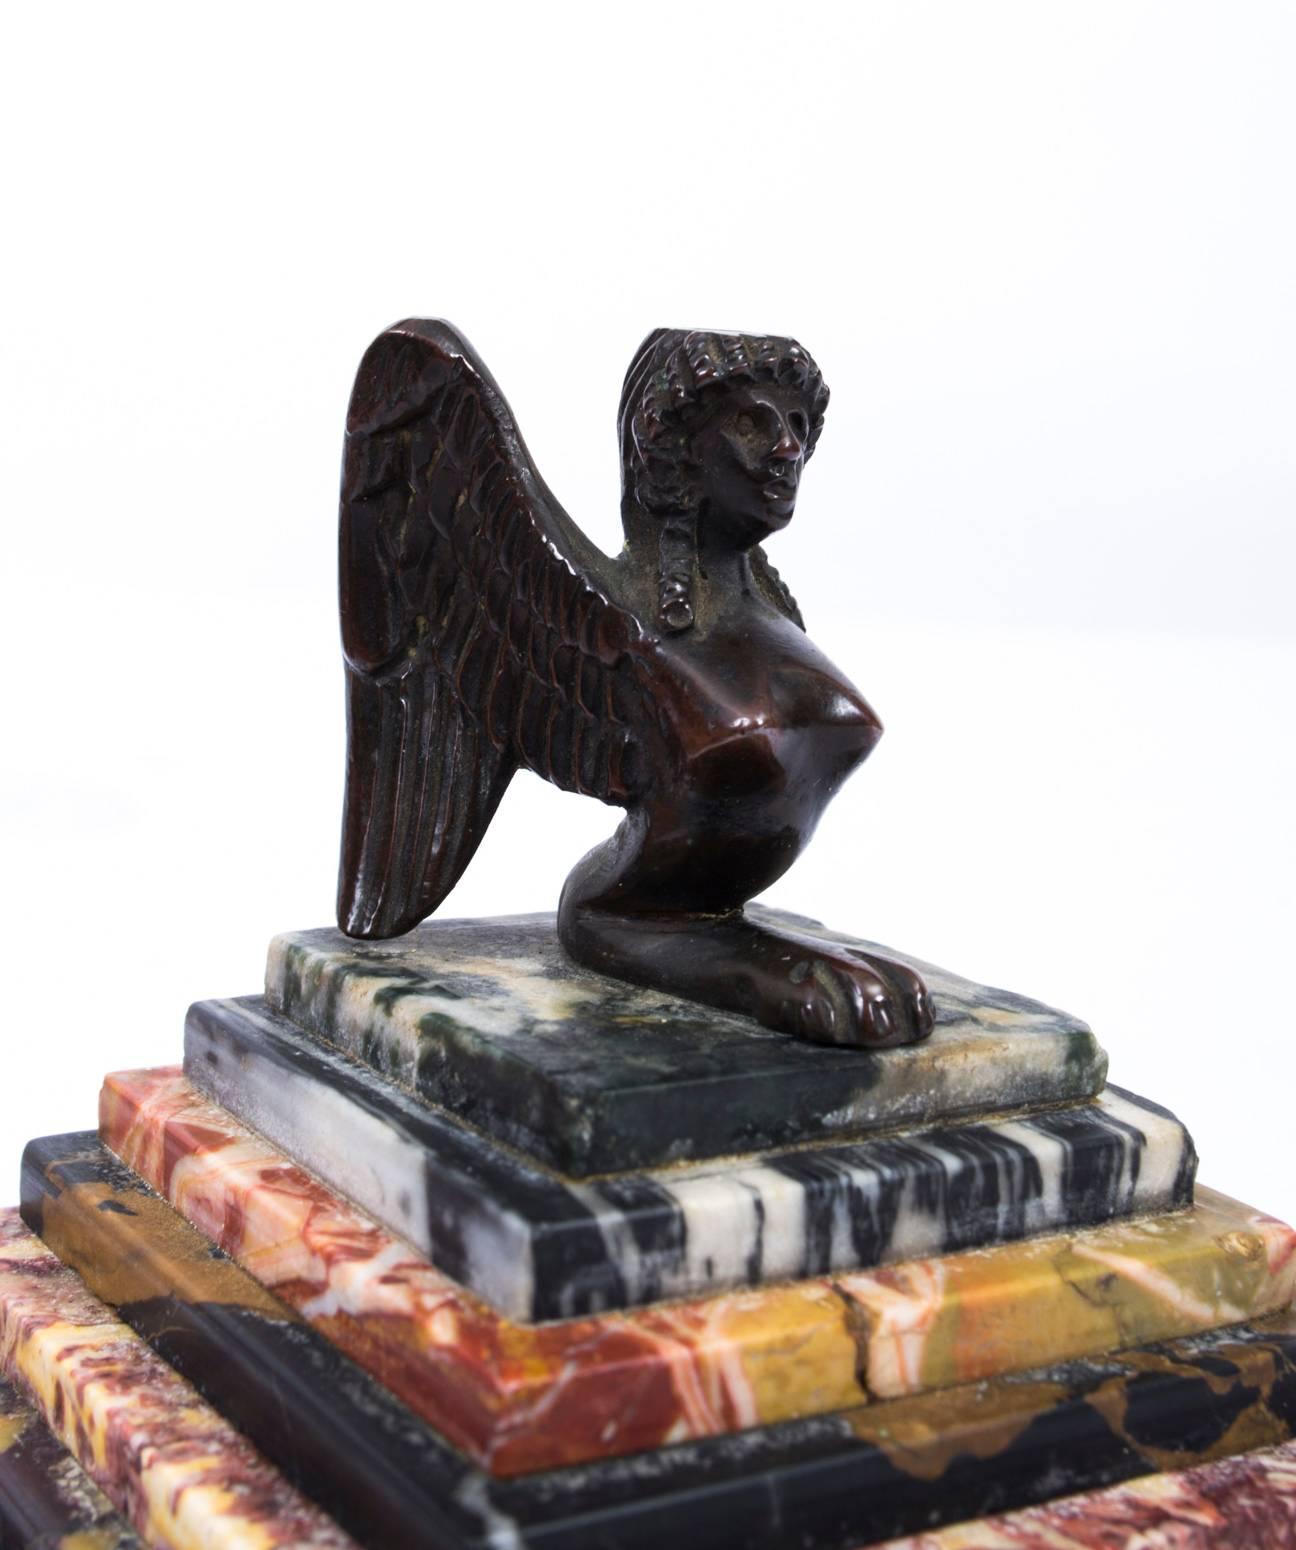 This is a superb antique 19th century French paperweight with a bronze model of a harpy raised on a stepped specimen marble plinth, also dating from the mid-19th century.
In Greek and Roman mythology a harpy is a rapacious monster described as